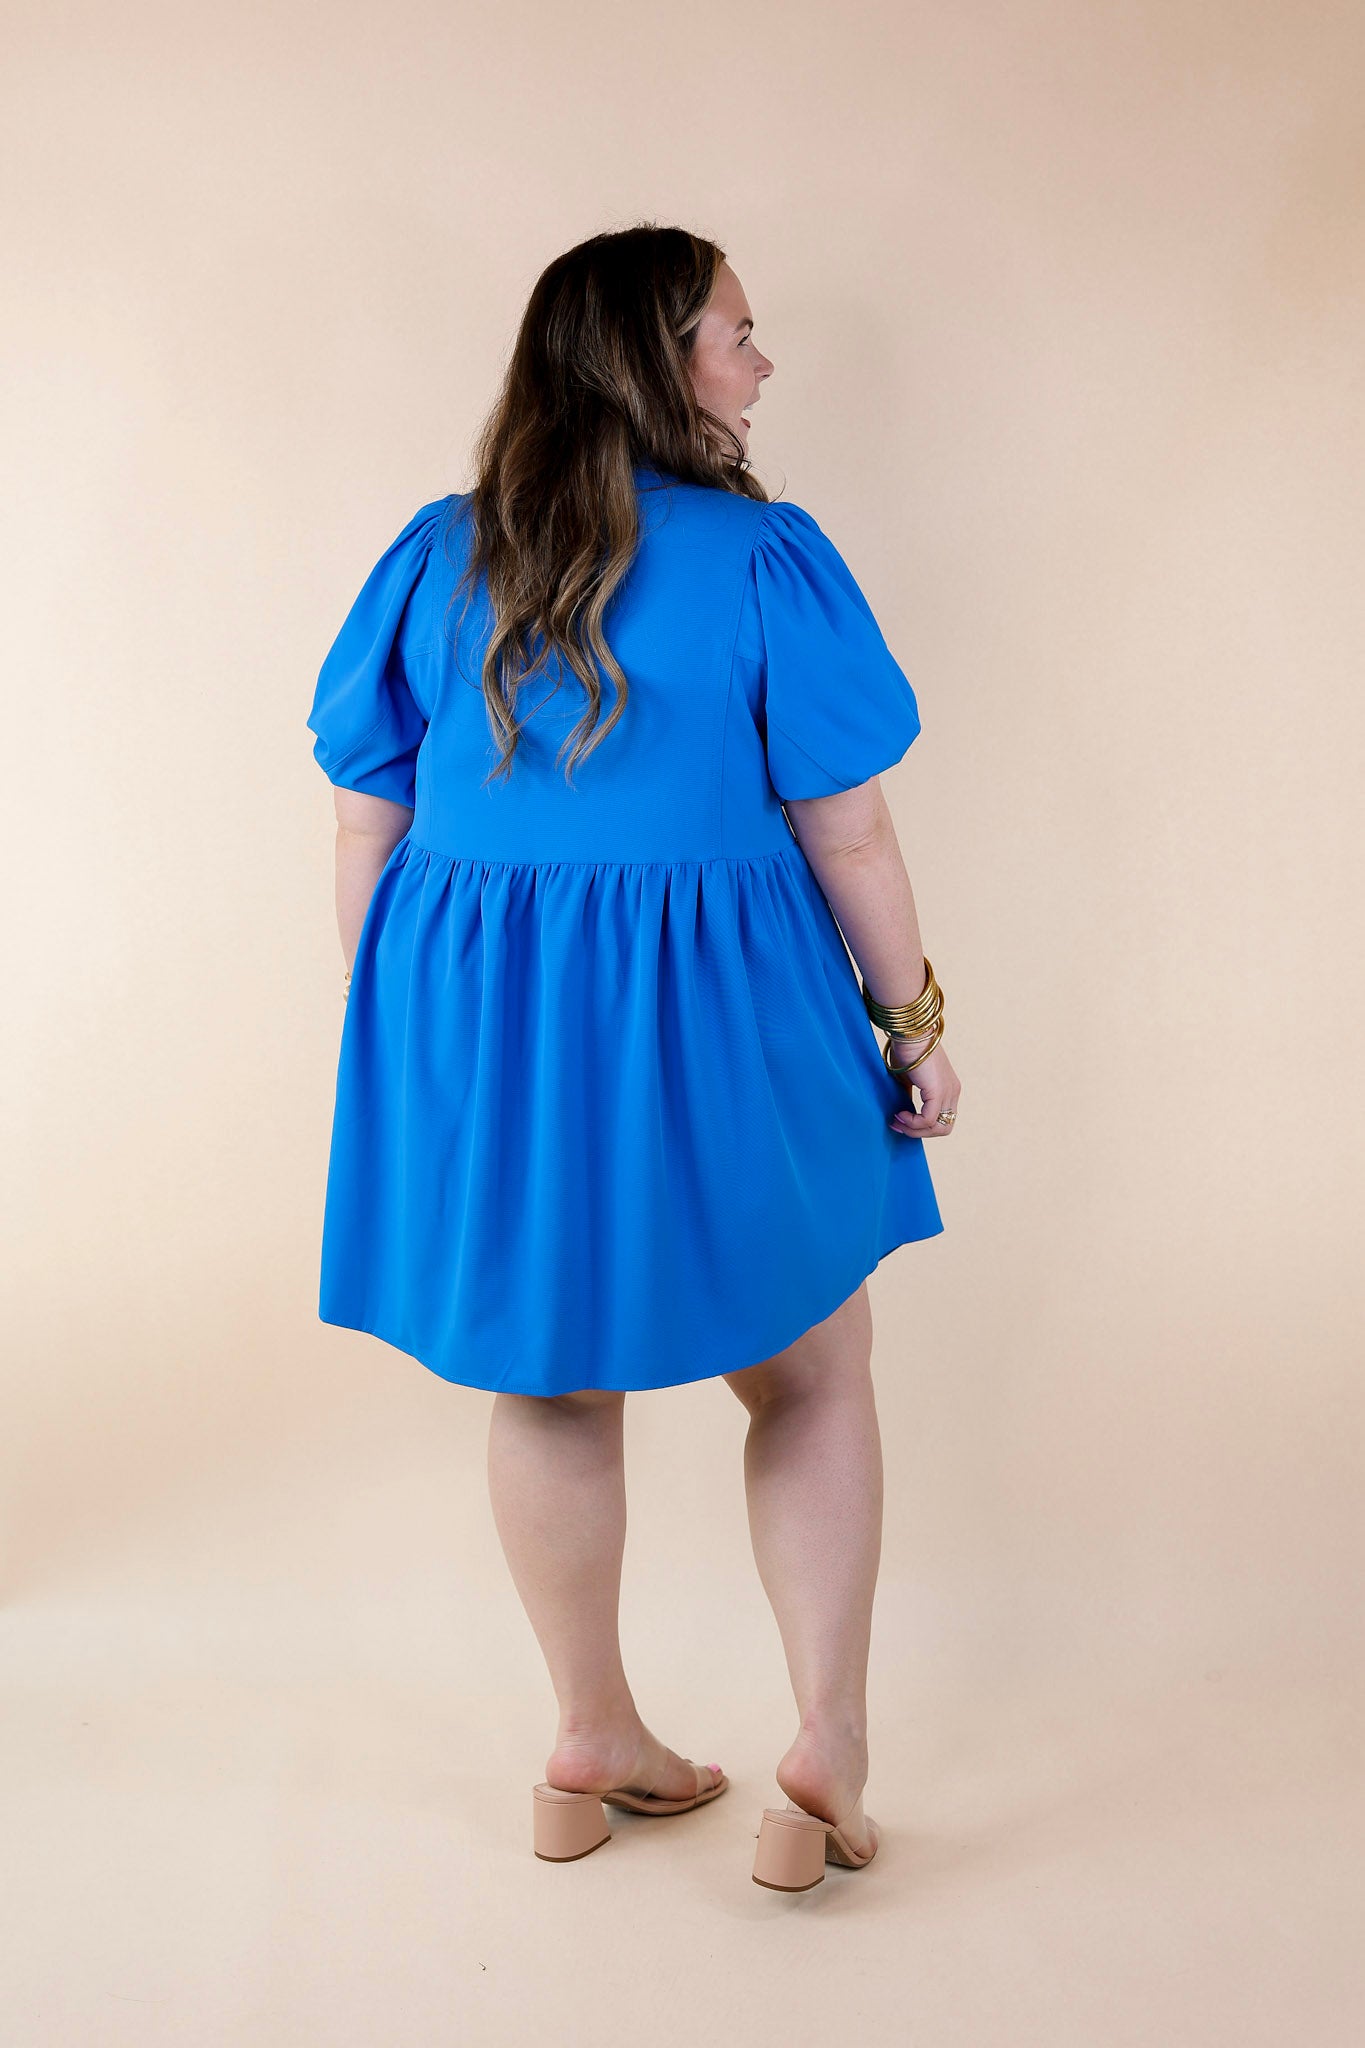 Adventures Ahead Button Up Babydoll Dress in Bright Blue - Giddy Up Glamour Boutique